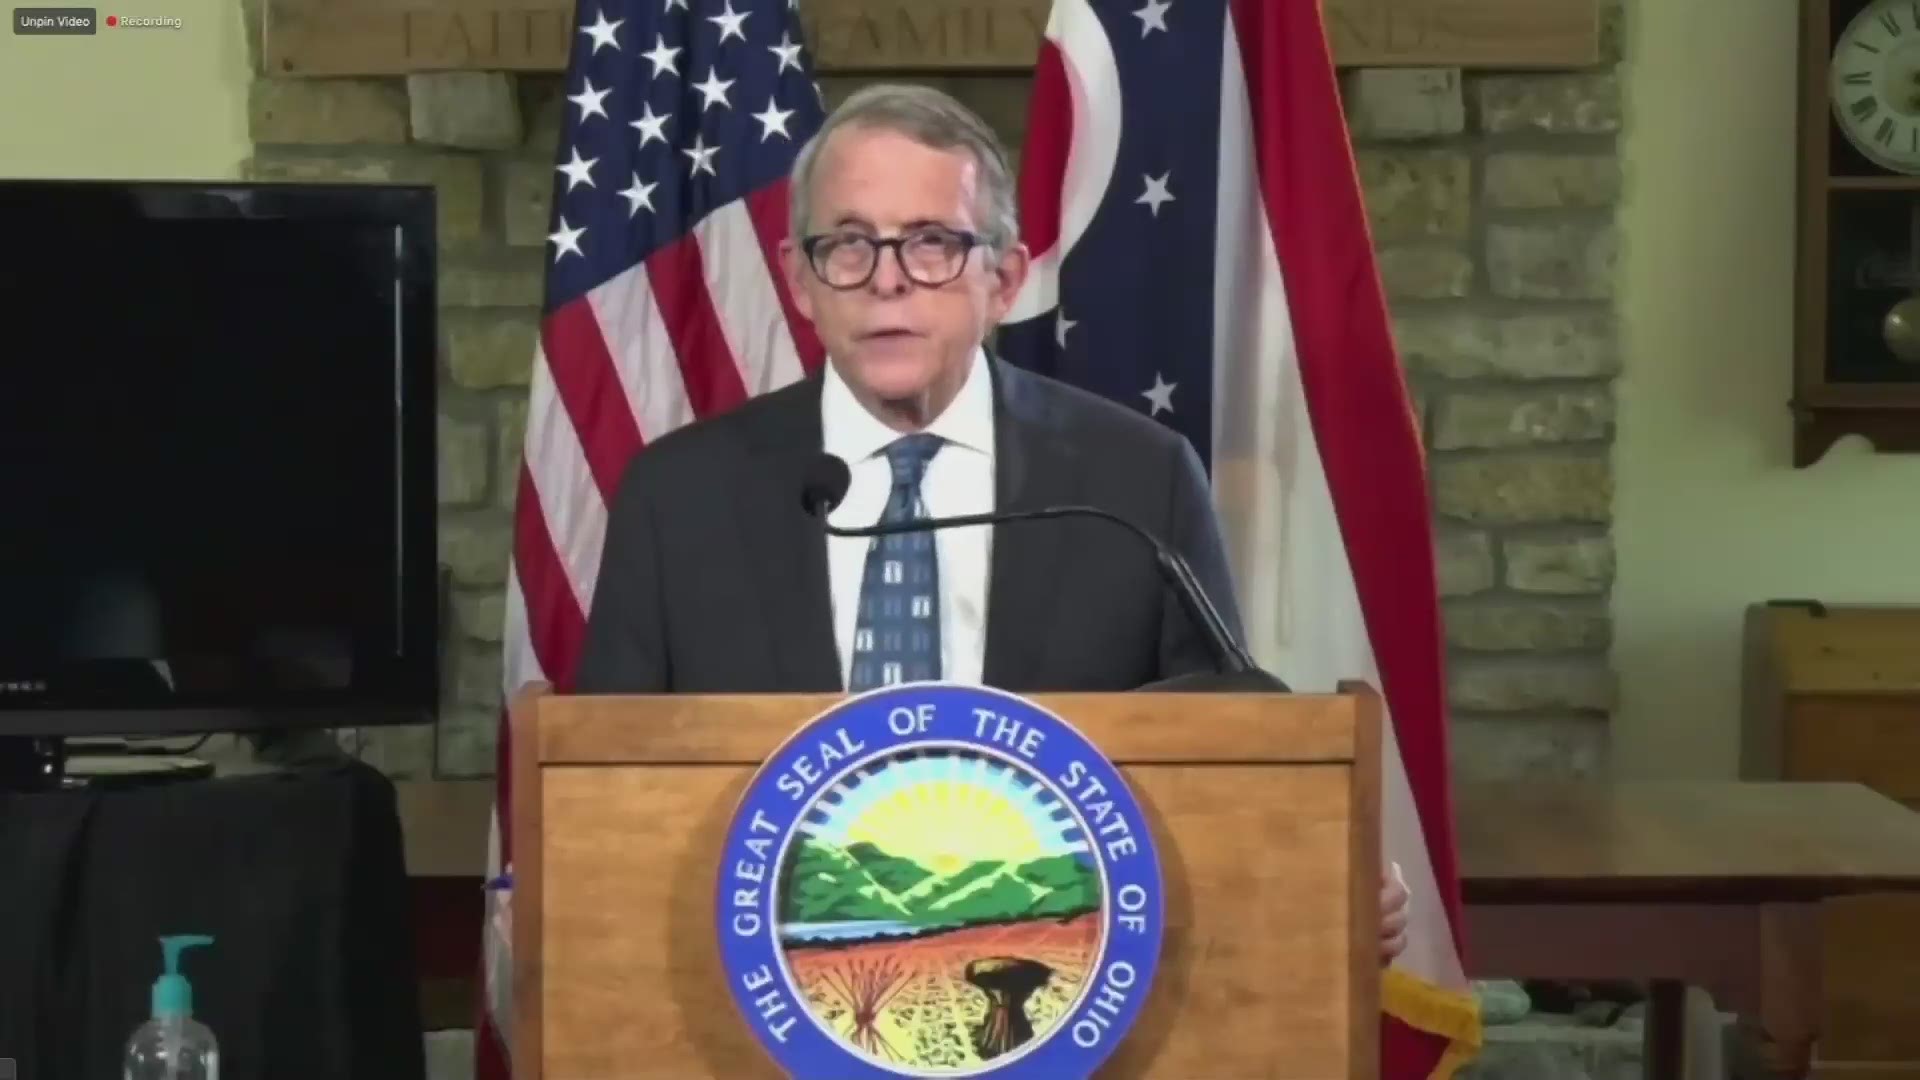 Ohio Governor DeWine revealed on Thursday that he'll make an announcement regarding high school sports on Tuesday, Aug. 18. "We have to slow this coronavirus down."